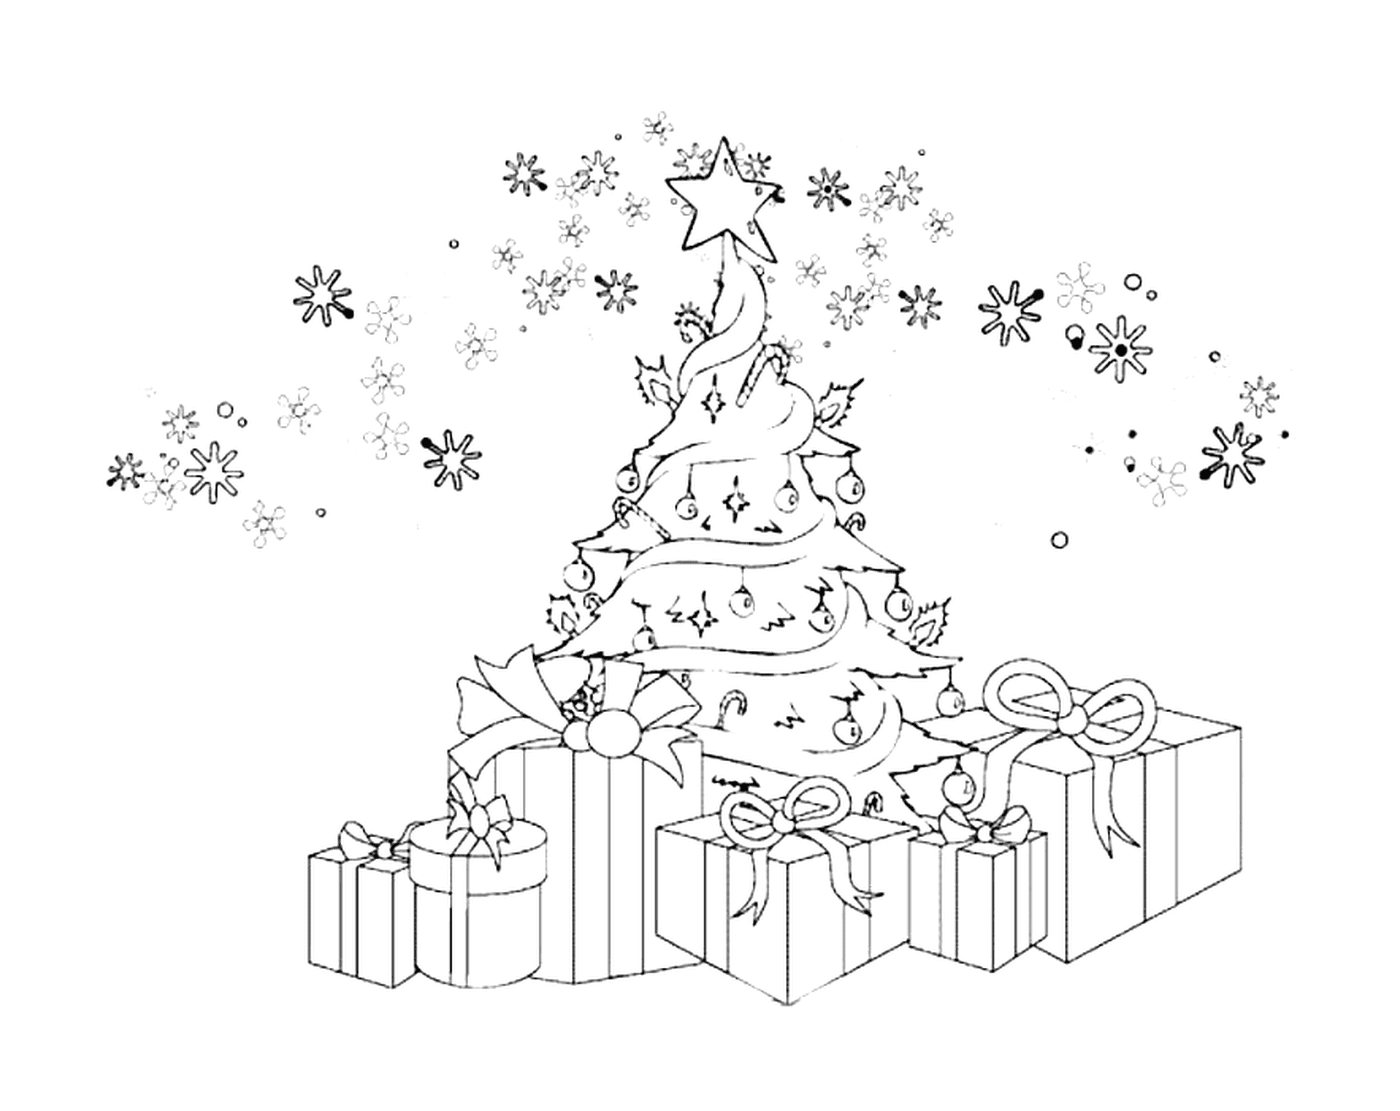  Christmas tree with gifts and snowflakes 